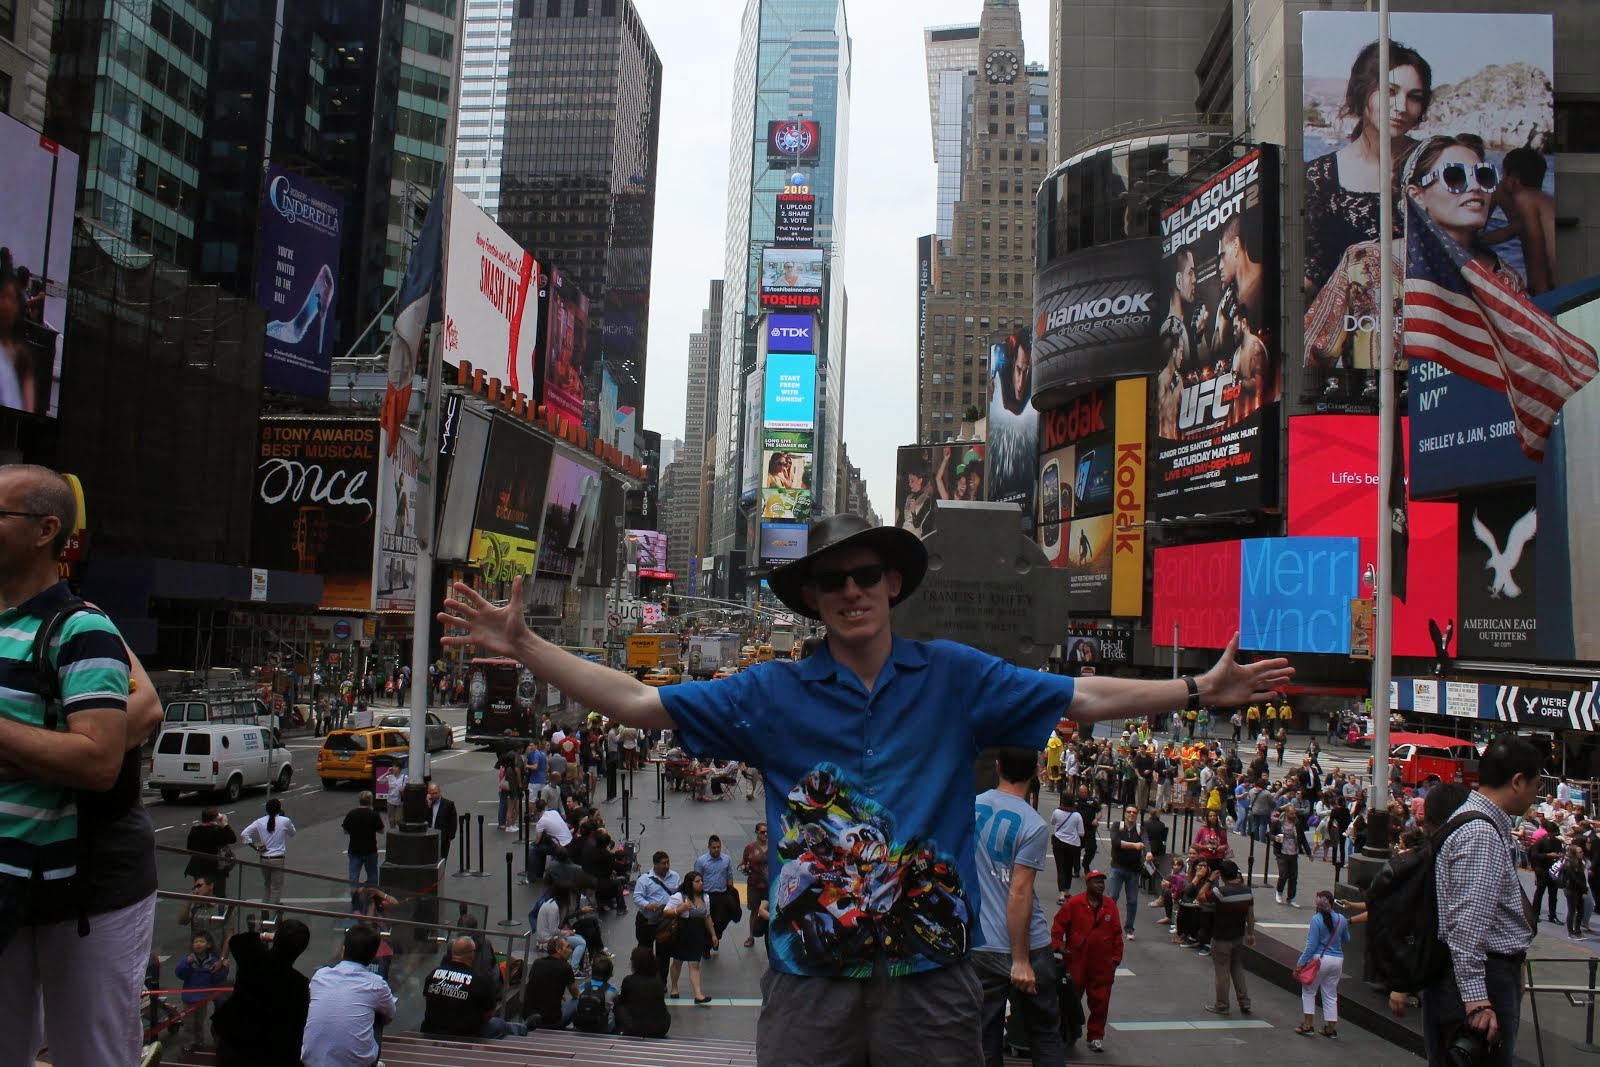 Me at Times Square